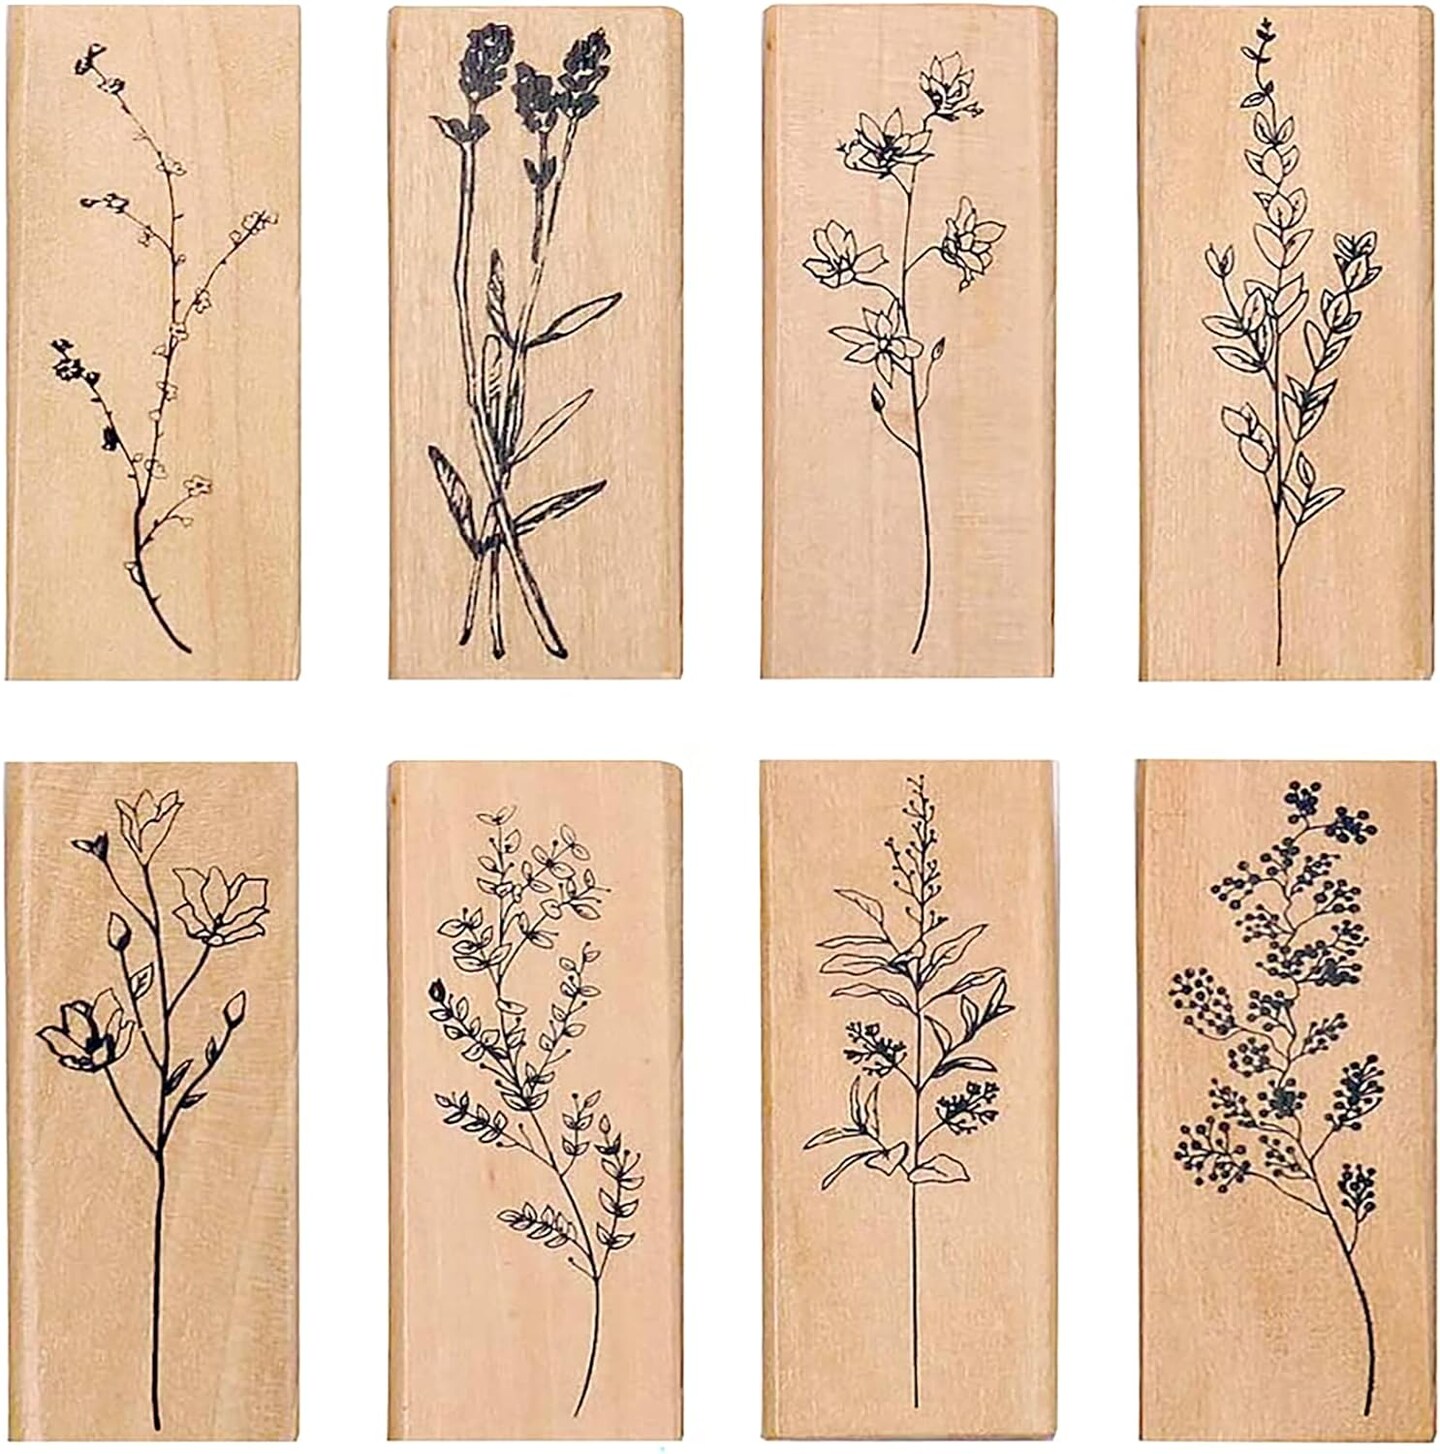 8 Pieces Wood Mounted Rubber Stamps, Plant and Flower Decorative Wooden Rubber Stamp Set for DIY Craft, Diary and Craft Scrapbooking